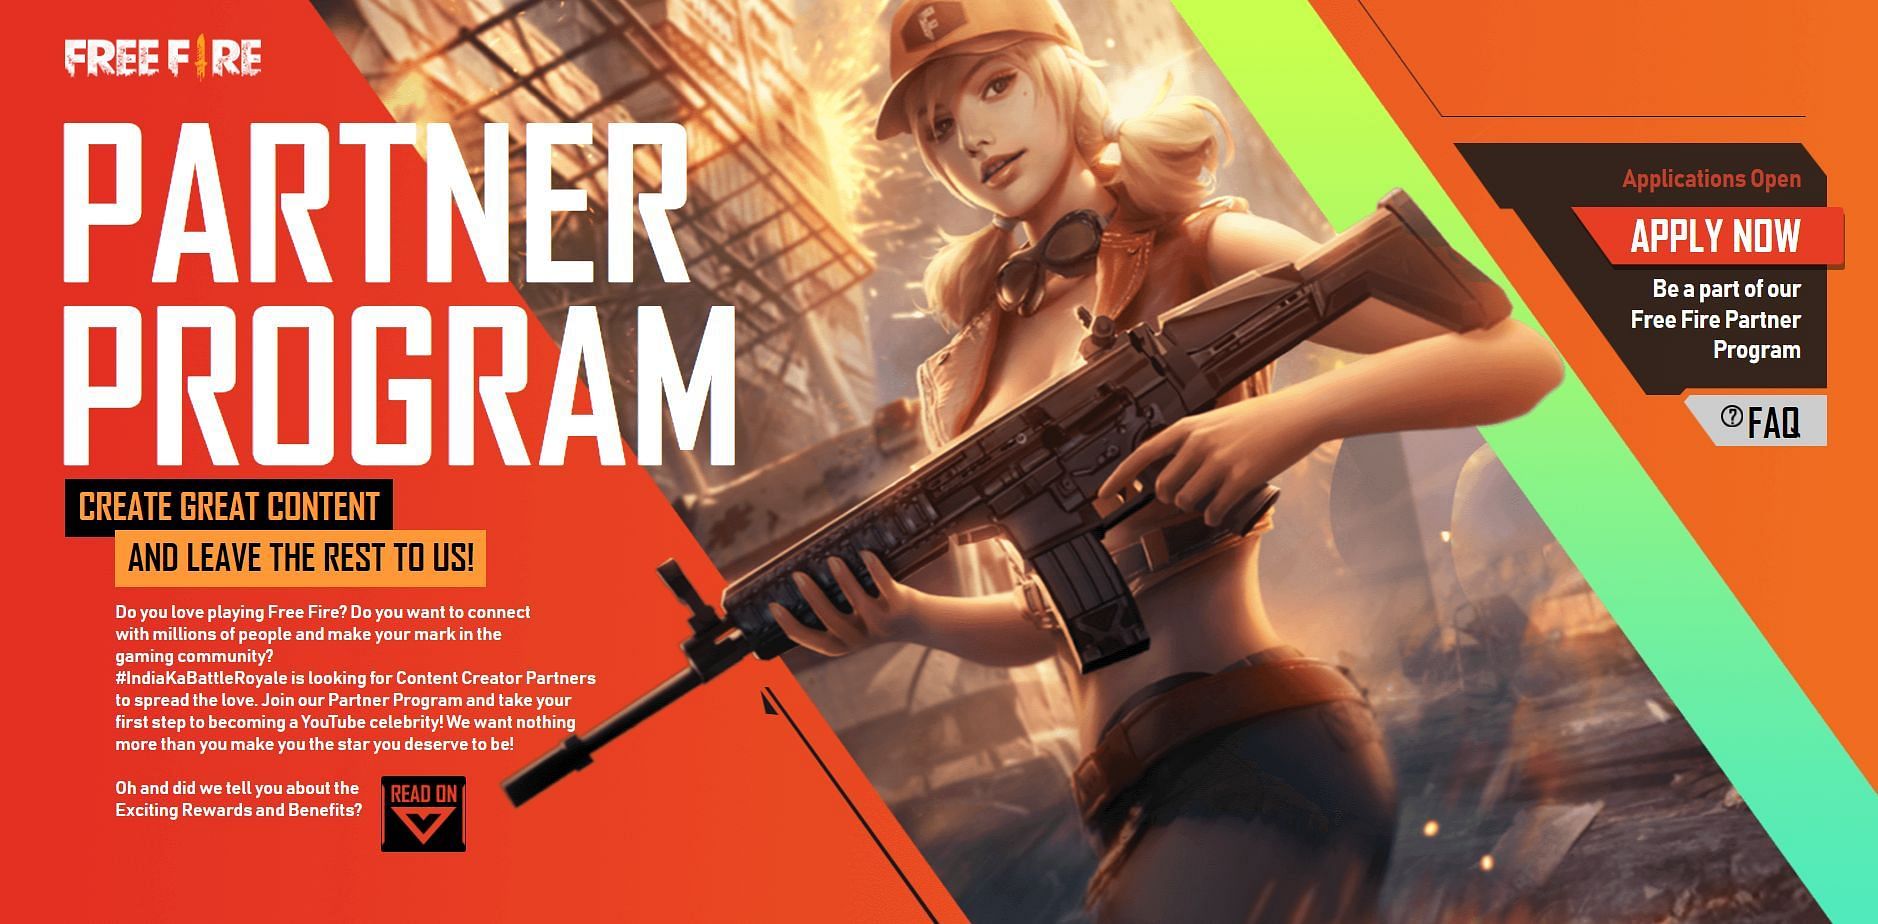 Gamers may join the Partner Program of the game by sending the application (Image via Garena)